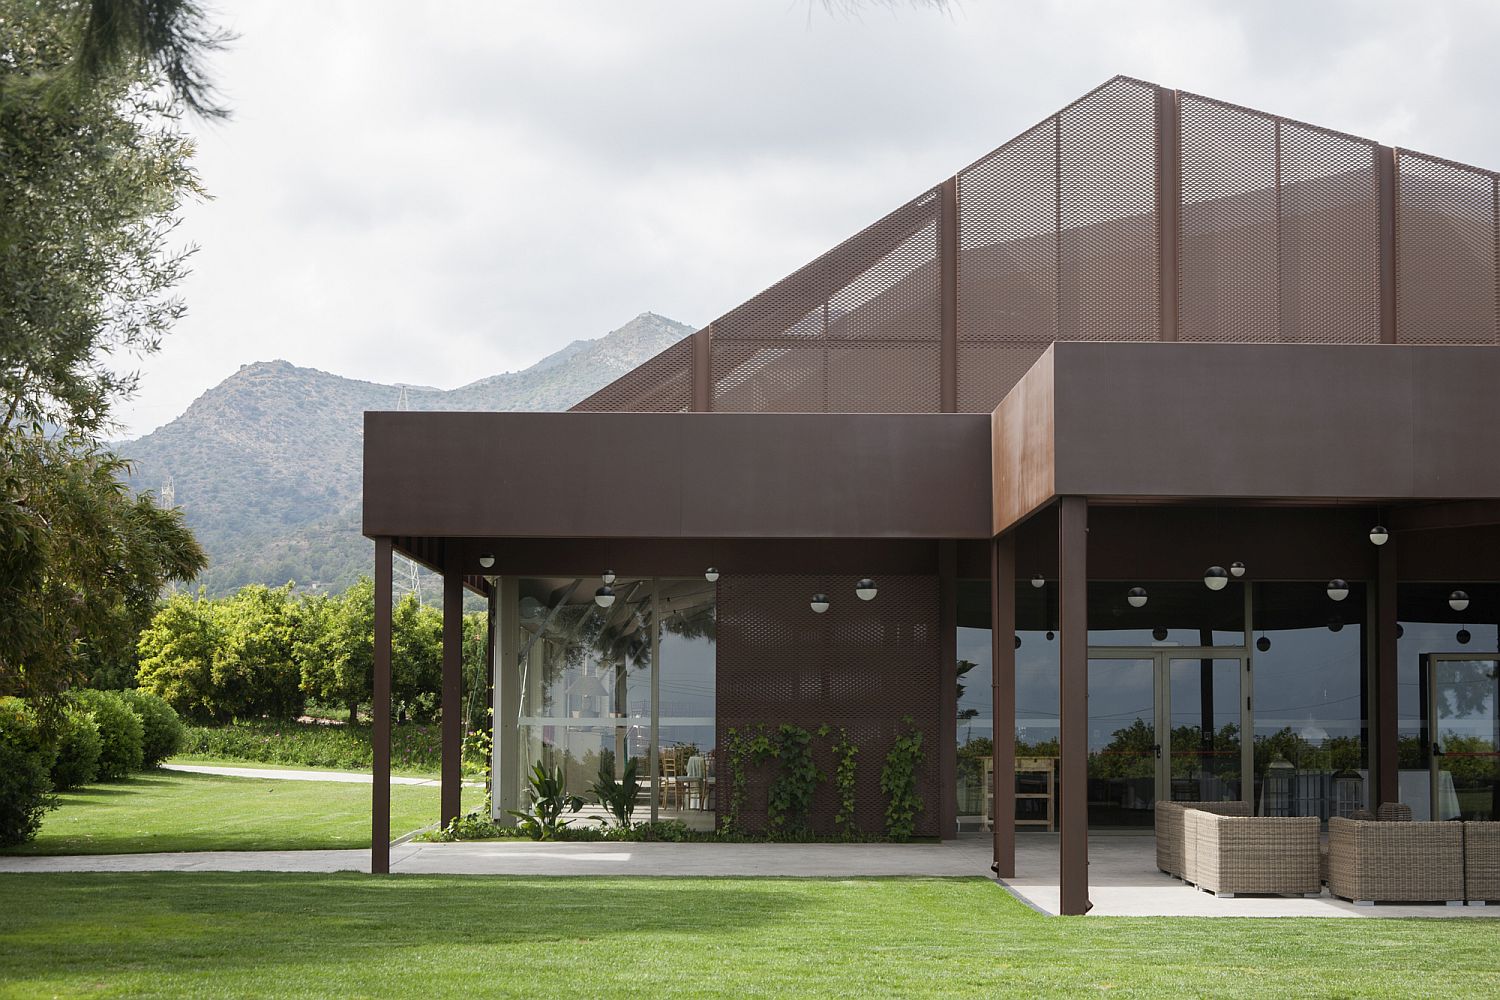 Corten-steel-structure-creates-fabulous-outdoor-spaces-protected-from-the-sun